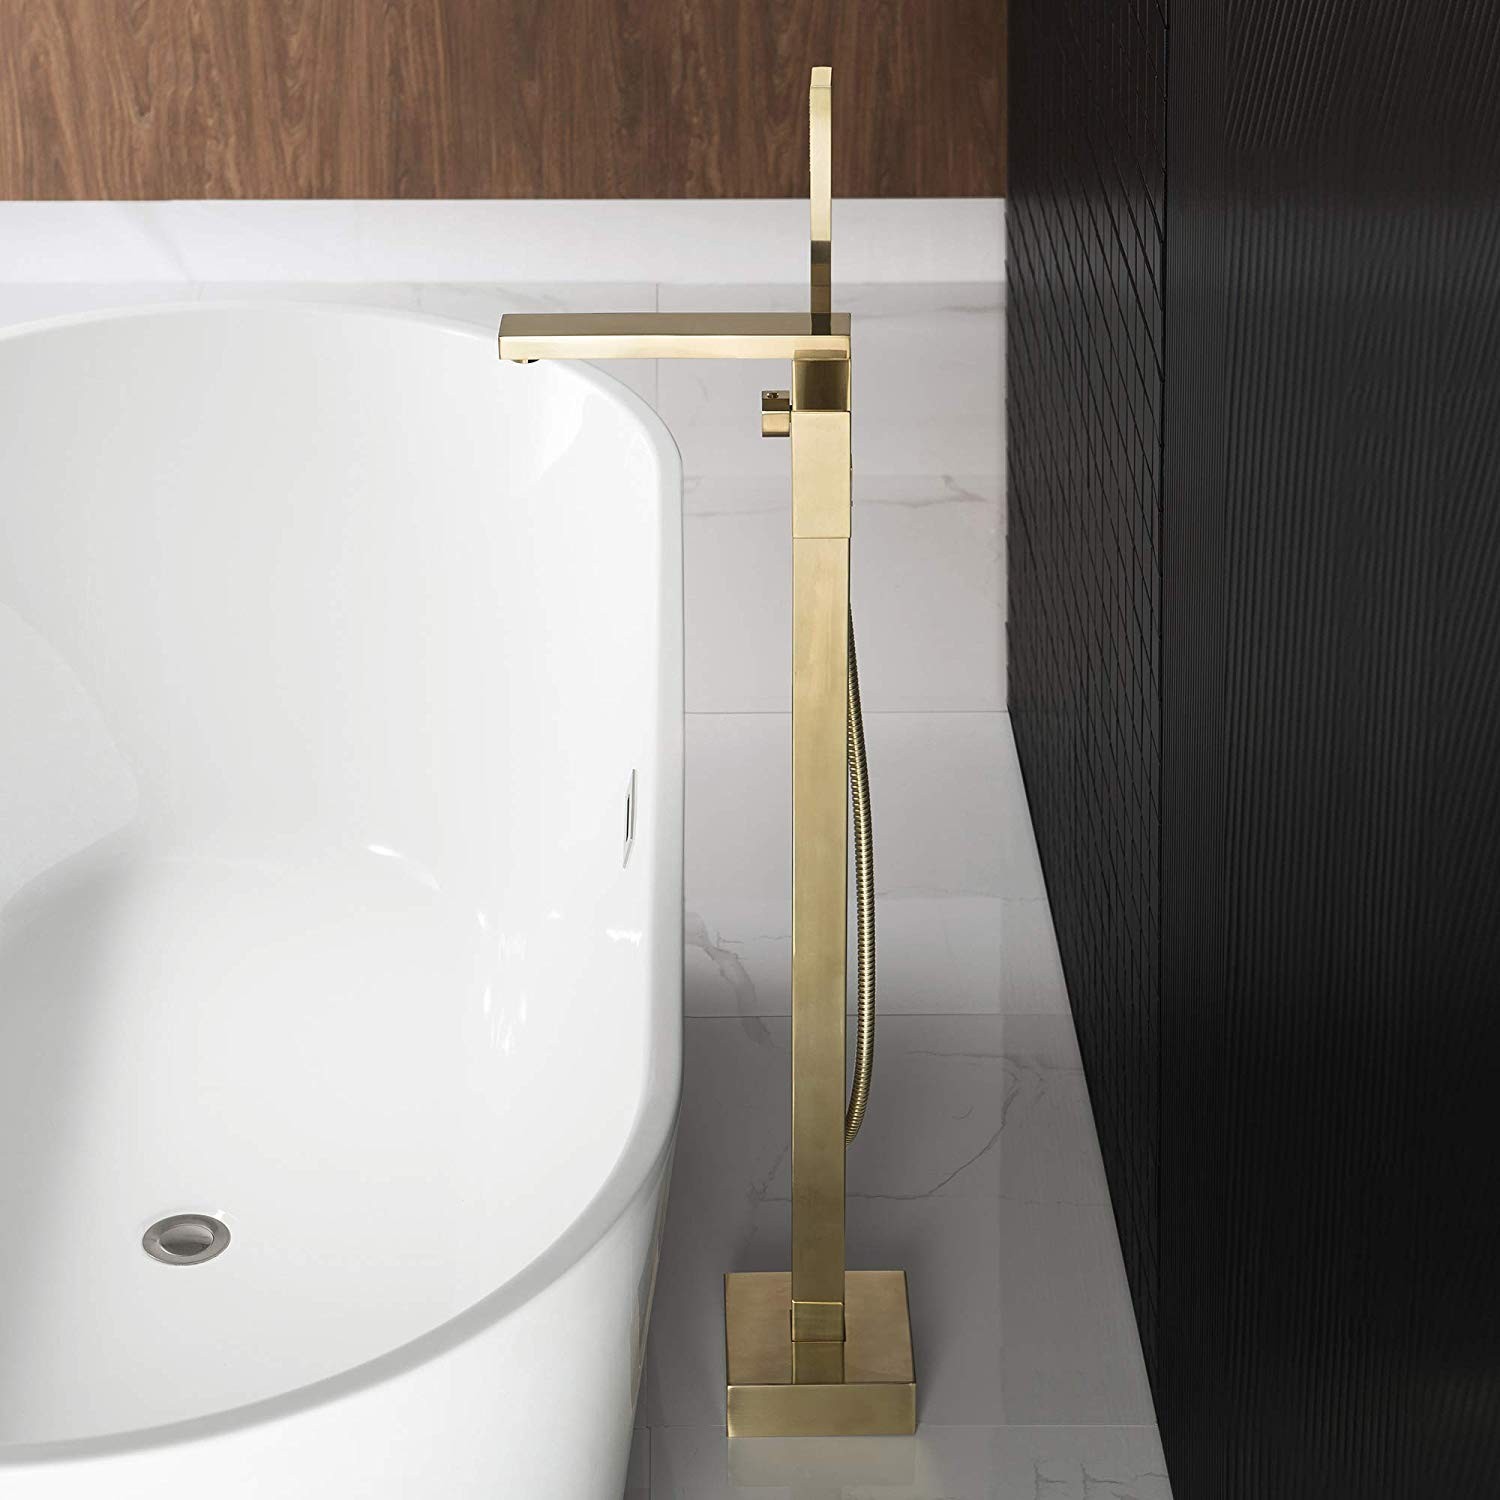  WOODBRIDGE F0008BG Contemporary Single Handle Floor Mount Freestanding Tub Filler Faucet with Hand shower in Brushed Gold Finish._10007